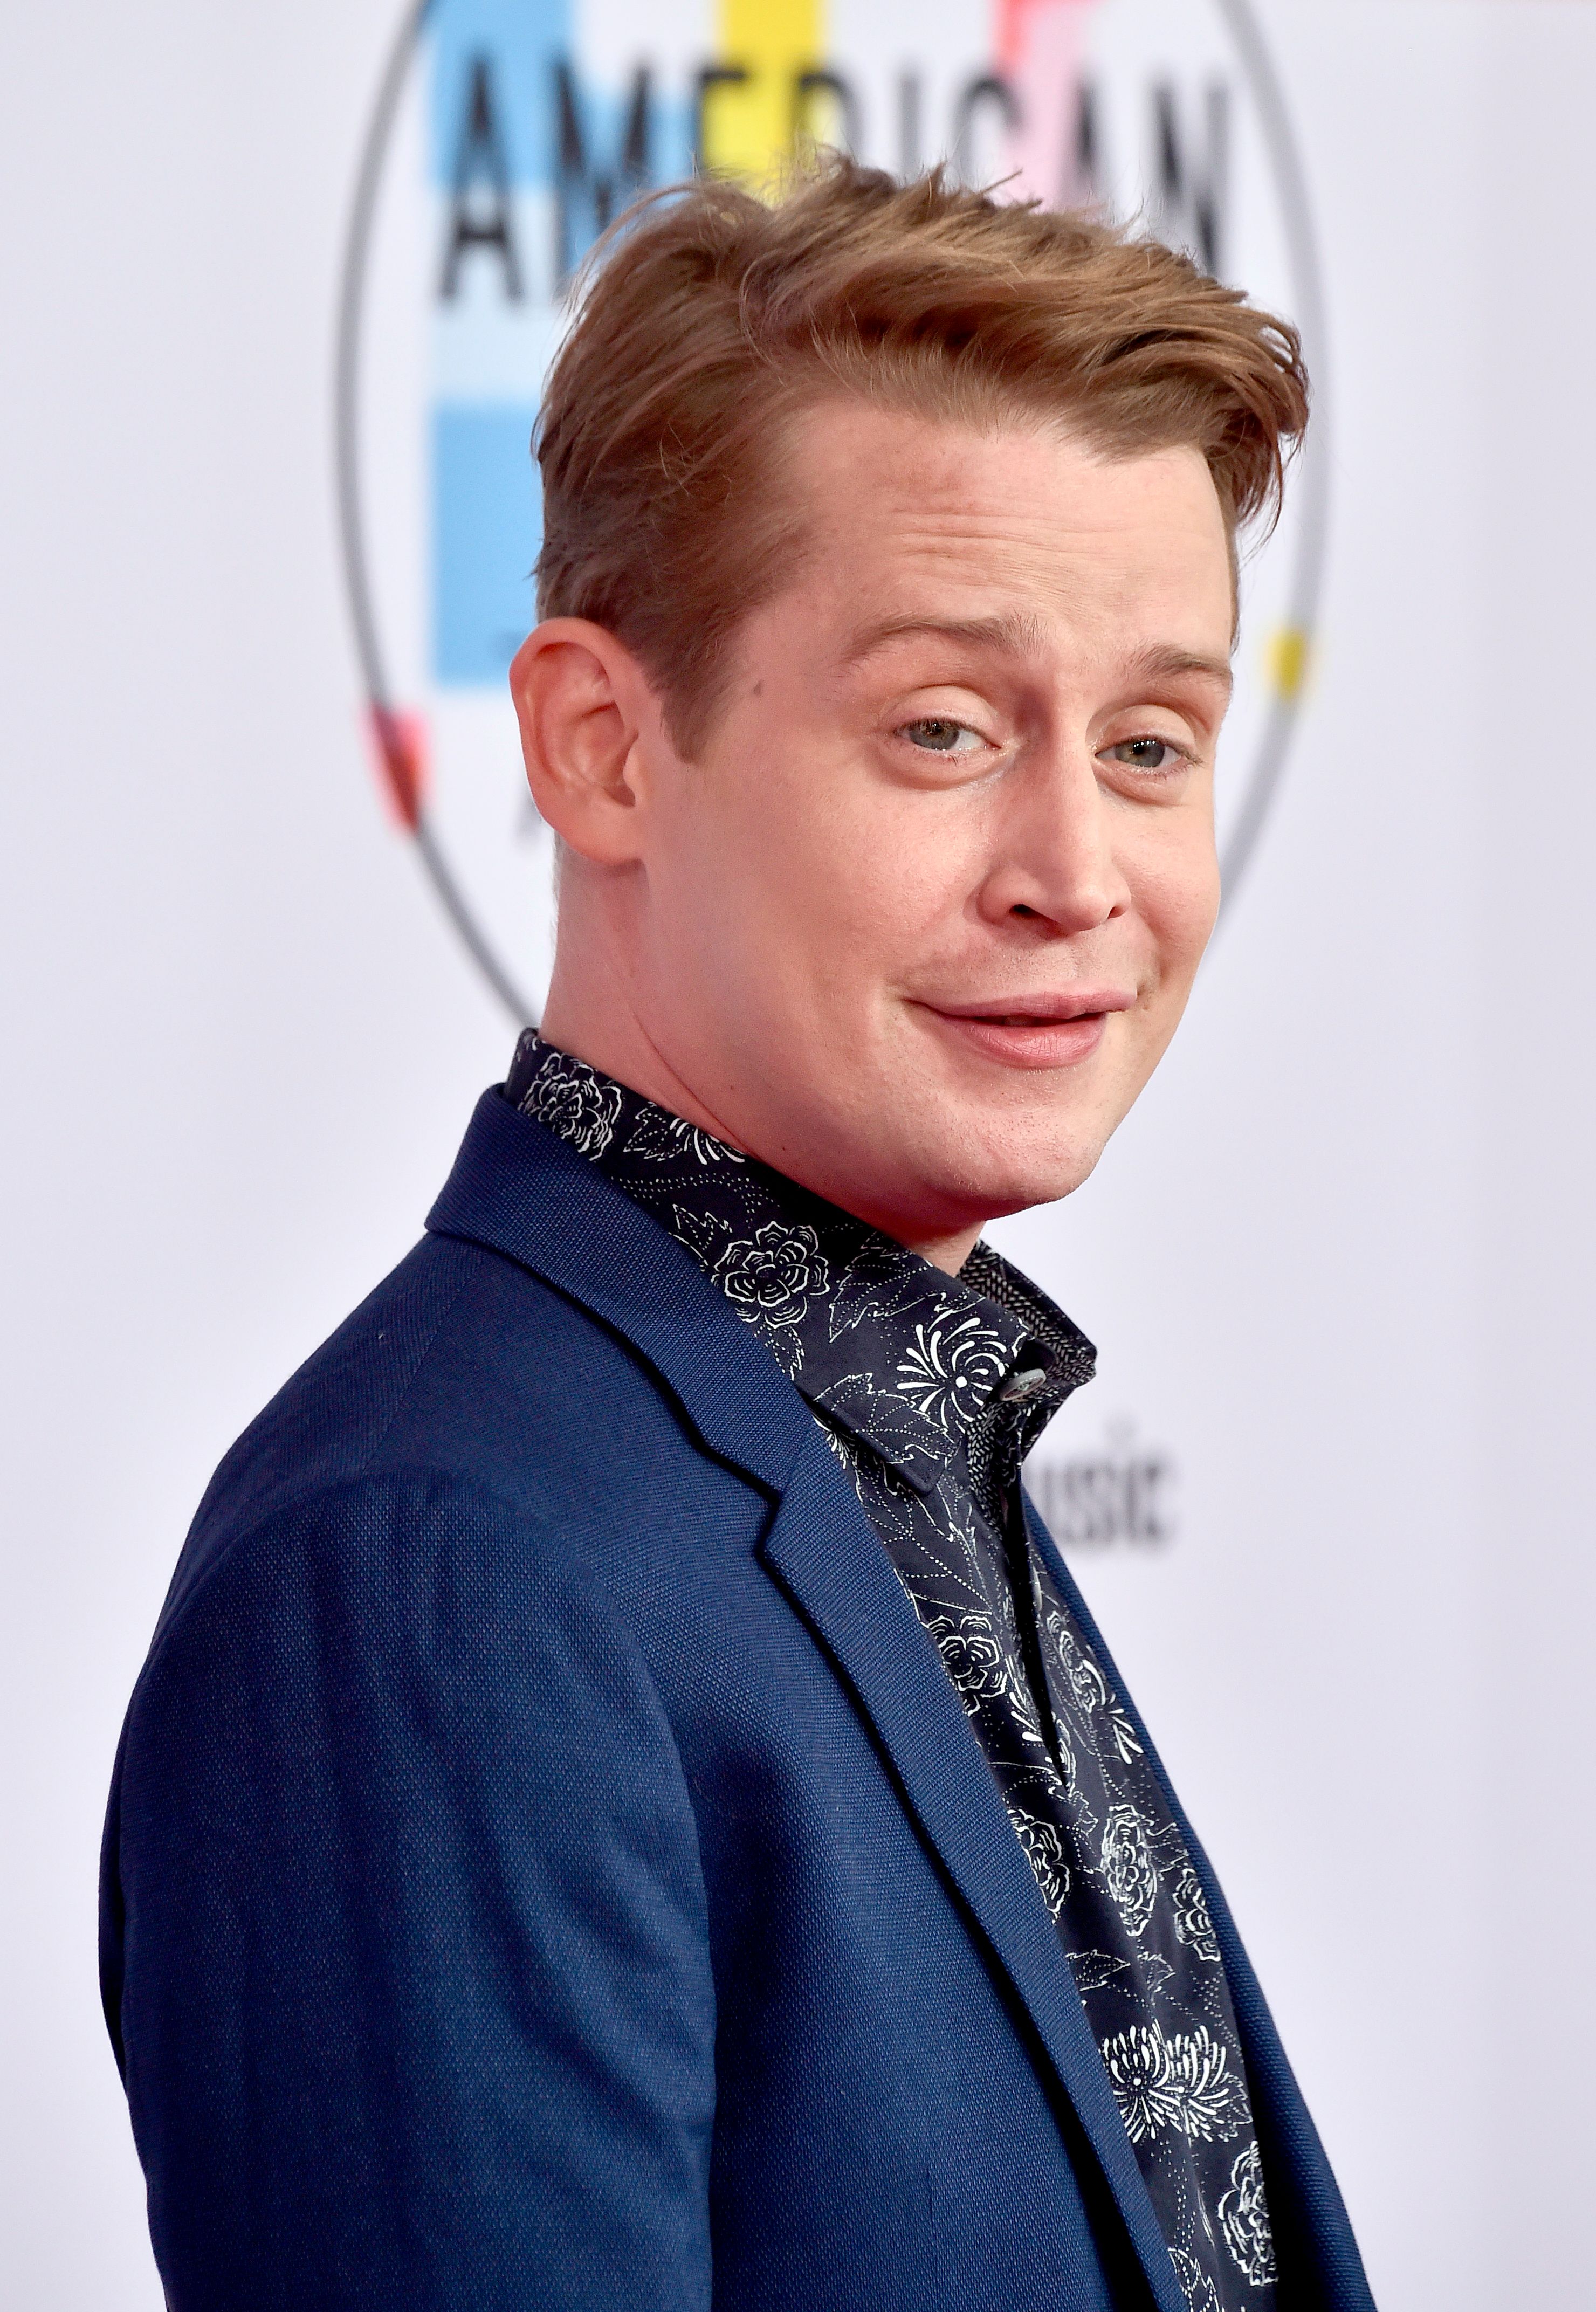 Macaulay Culkin at the 2018 American Music Awards at Microsoft Theater on October 09, 2018 in Los Angeles, California | Photo: Getty Images